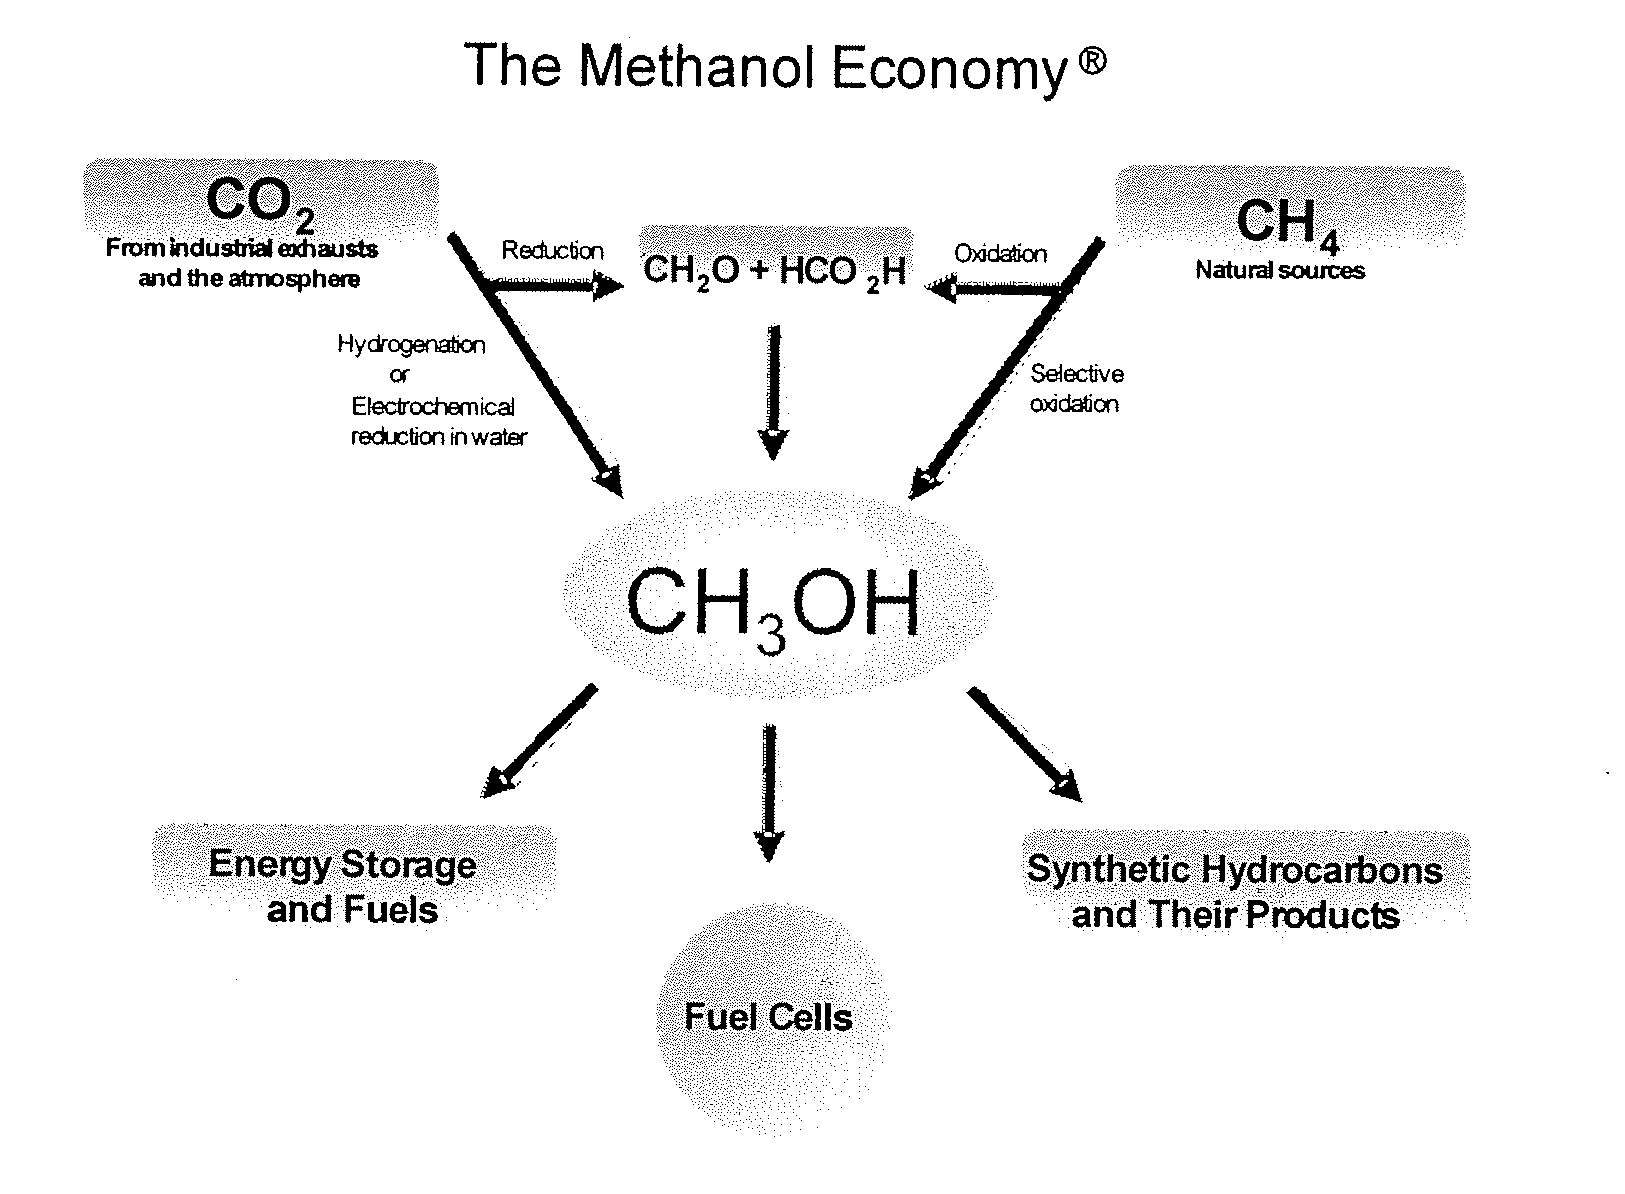 Conversion of carbon dioxide to methanol and/or dimethyl ether using bi-reforming of methane or natural gas